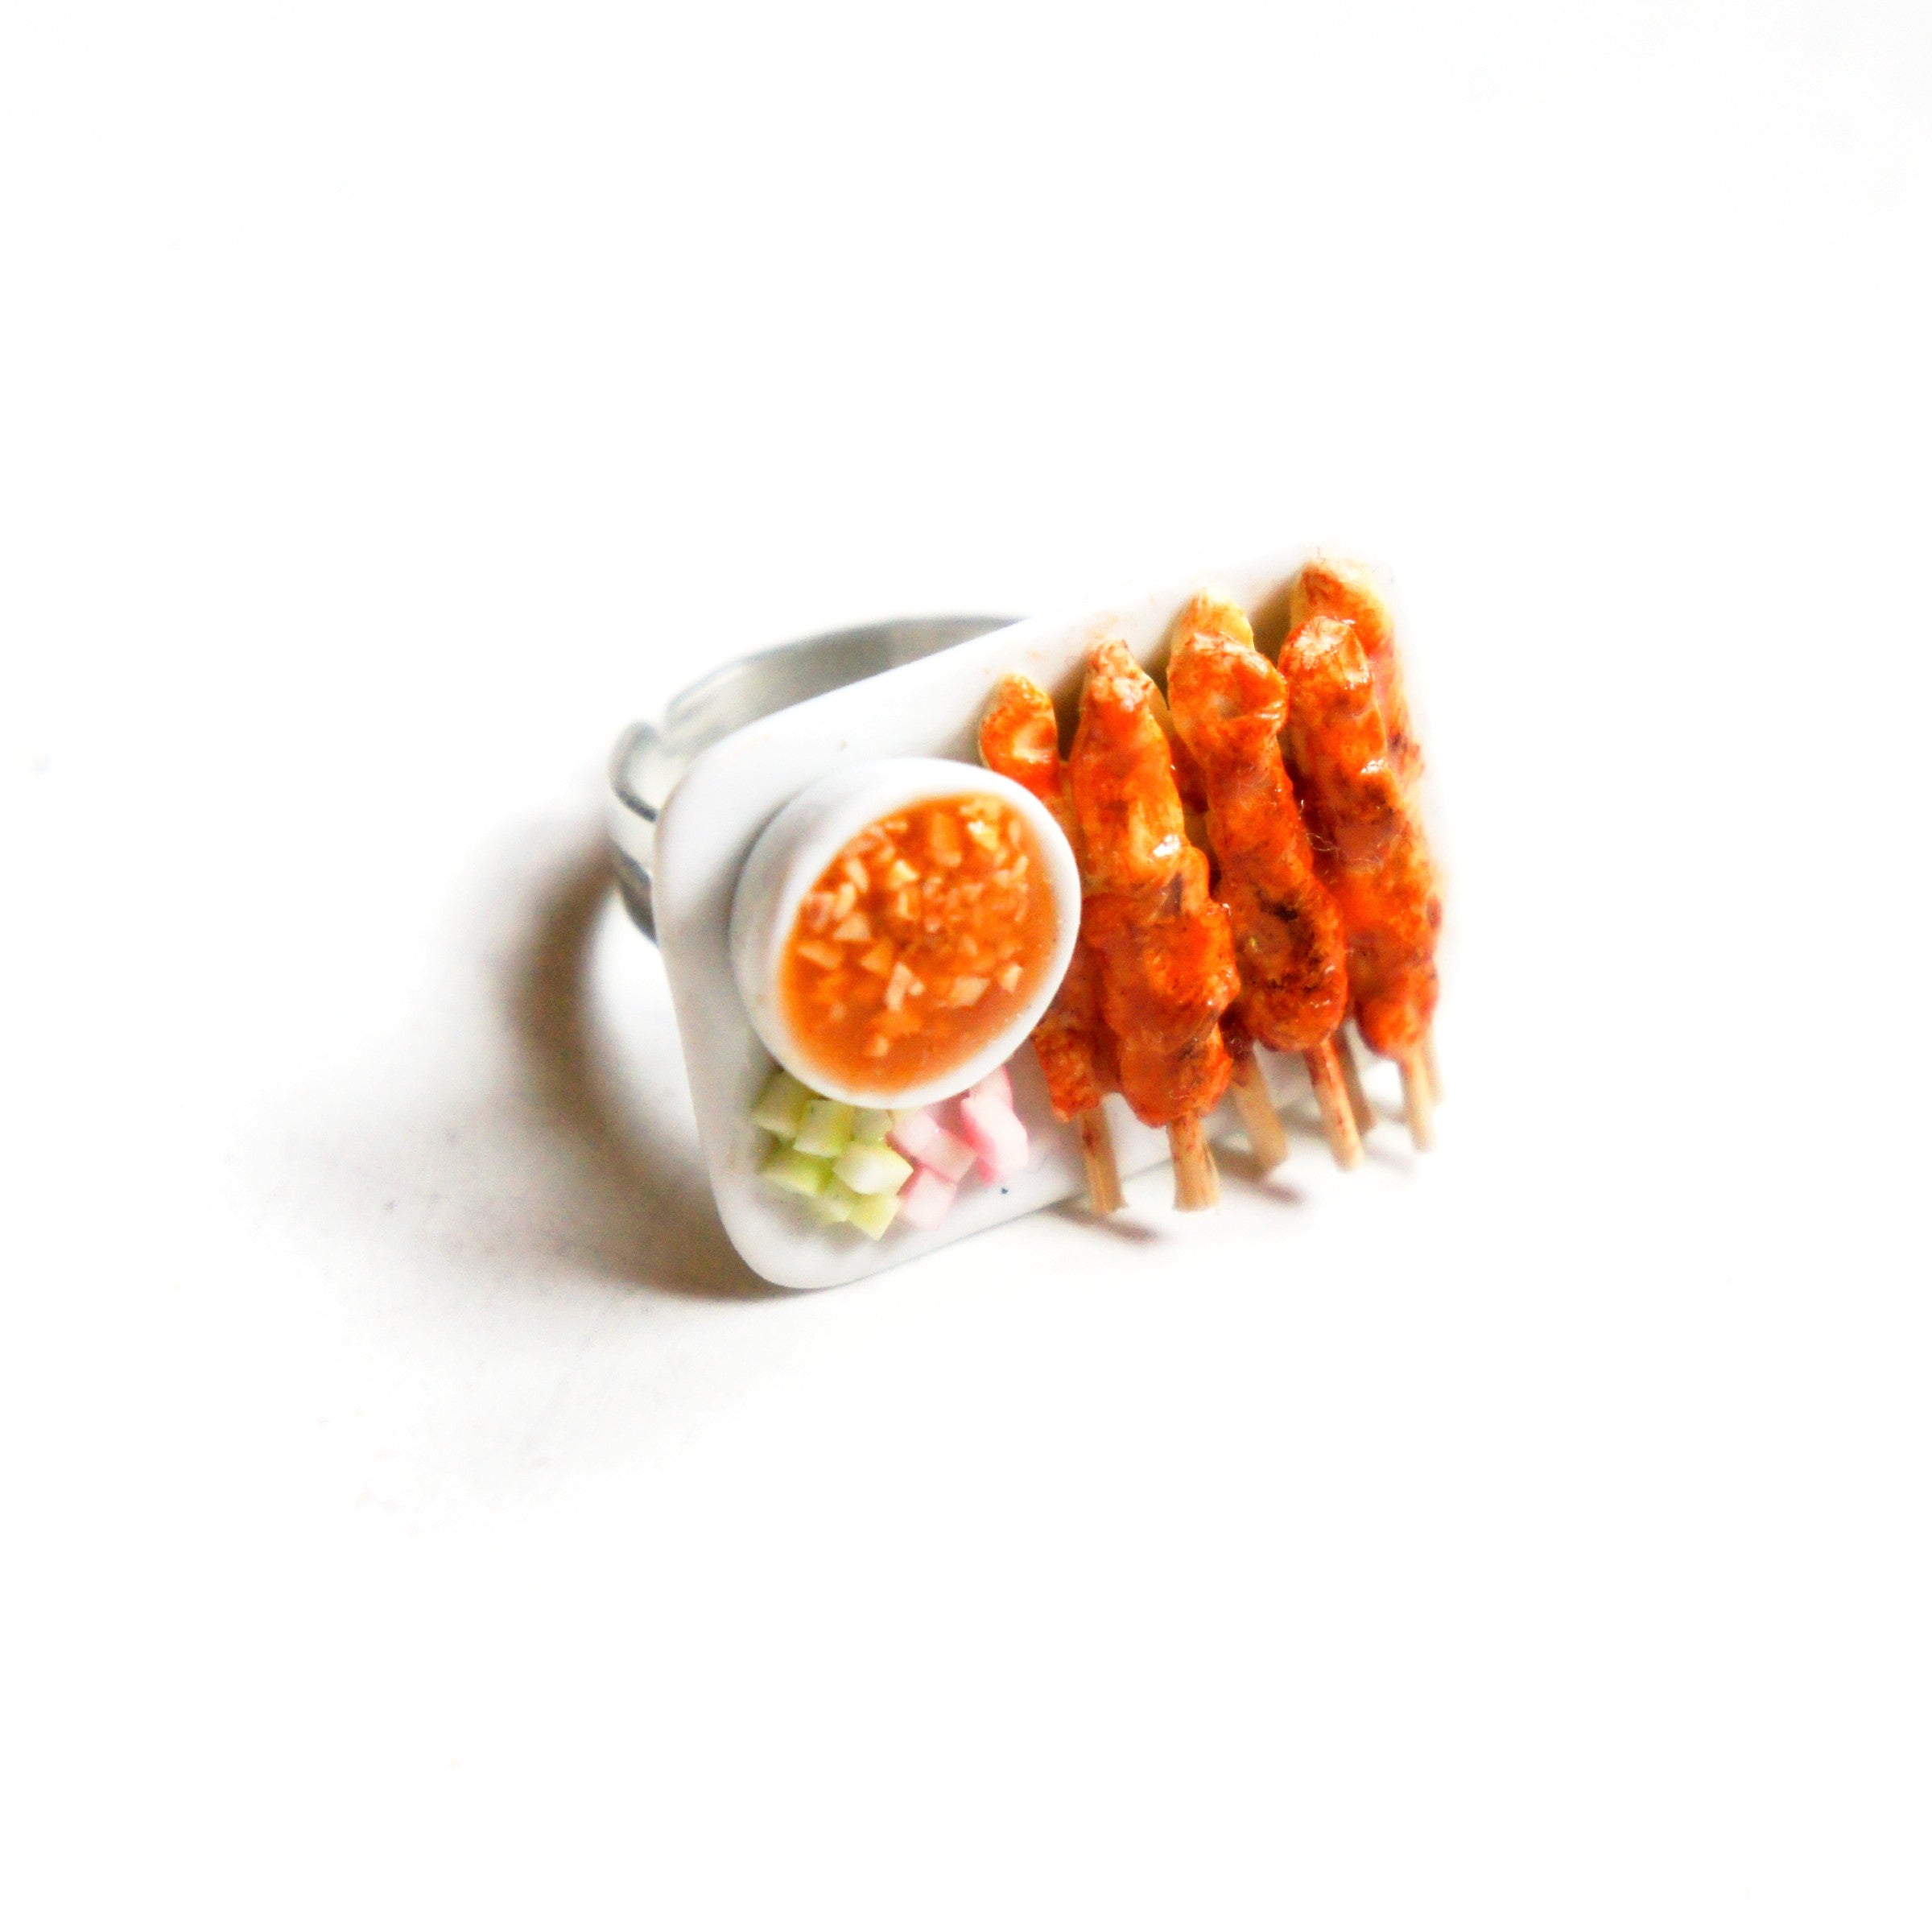 Chicken Satay RIng - Jillicious charms and accessories